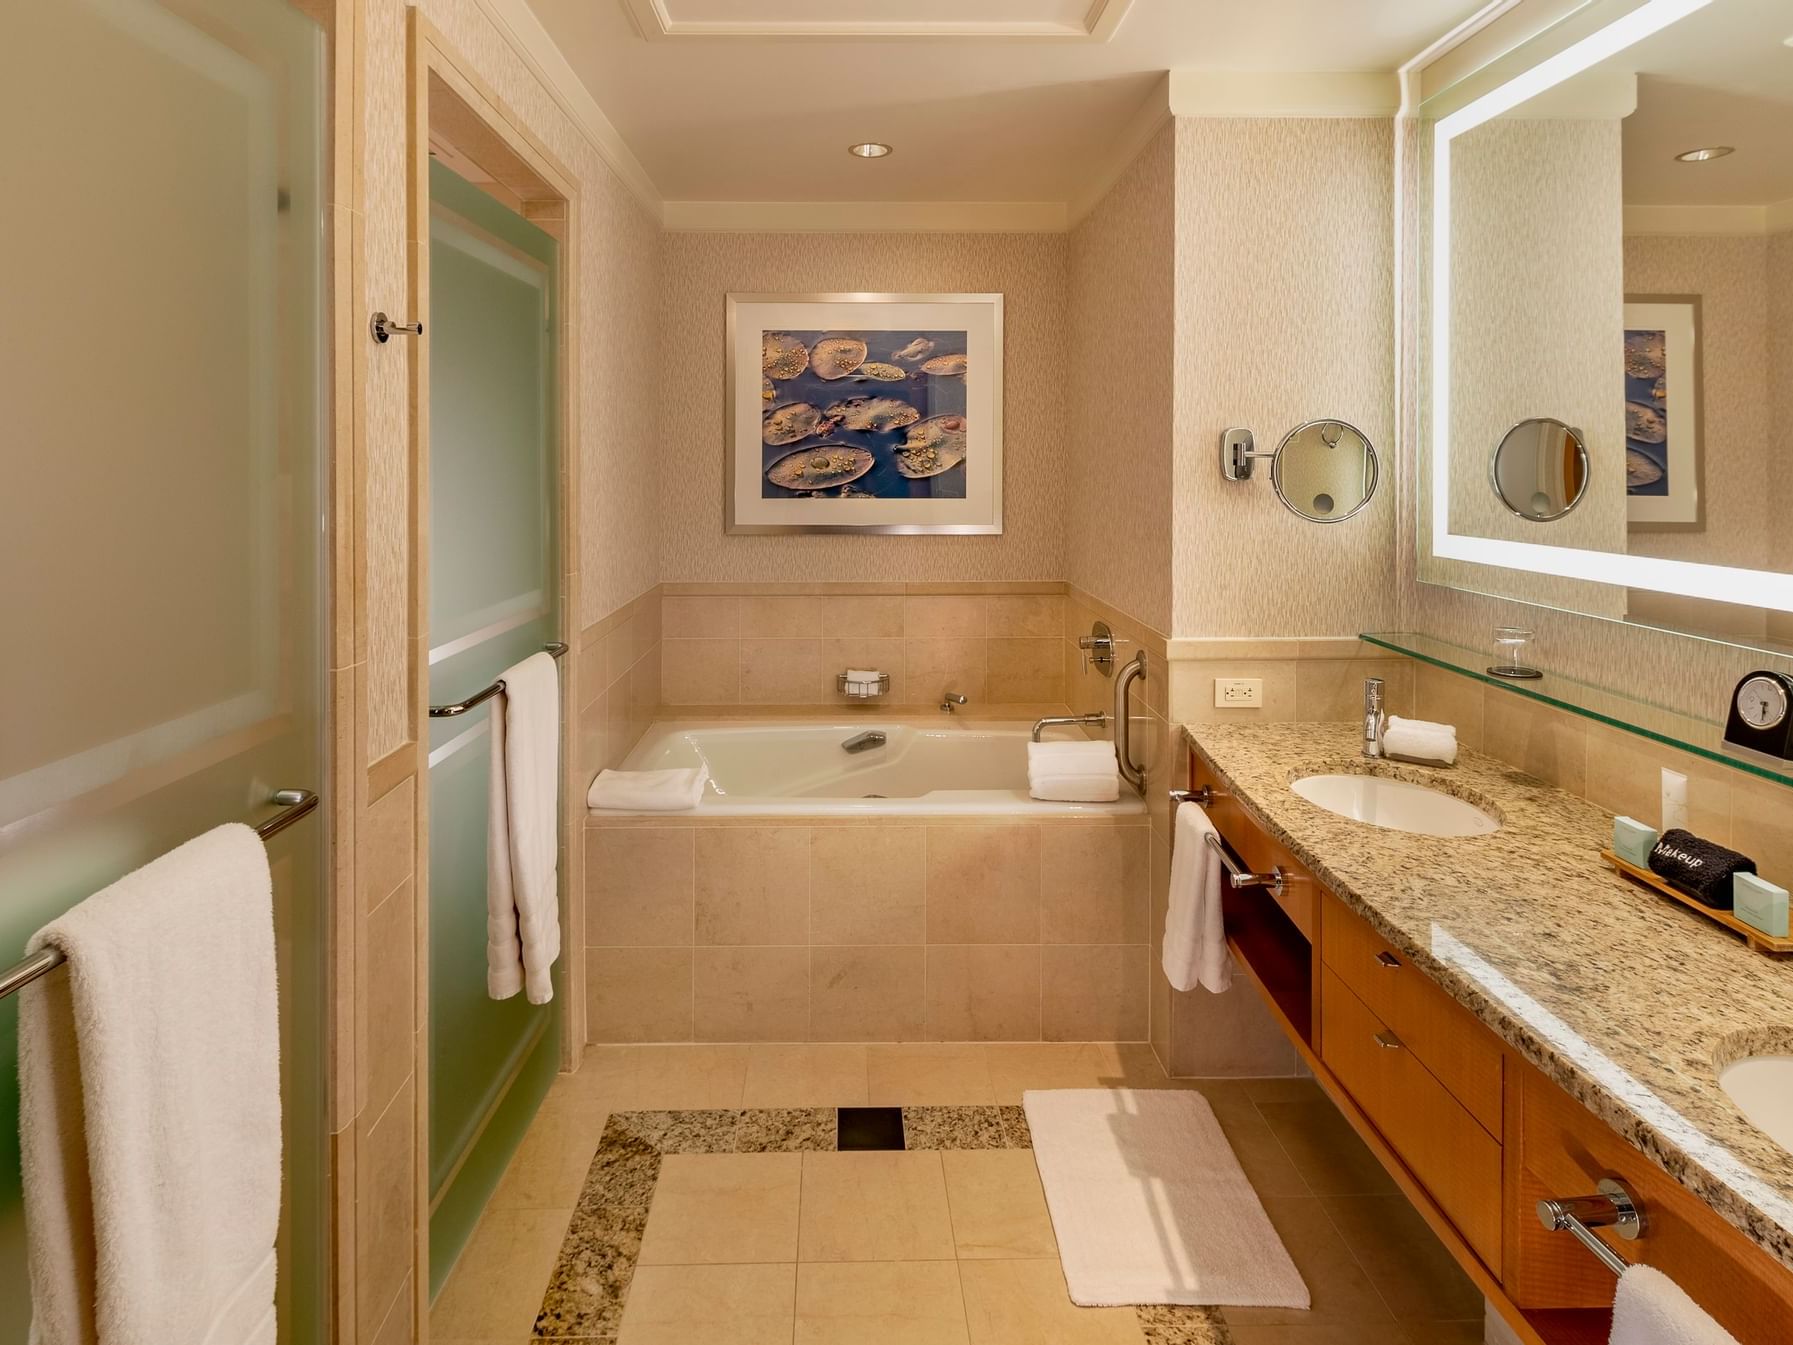 Luxury bathroom bathtub by the vanity in Premier Room at The Umstead Hotel and Spa